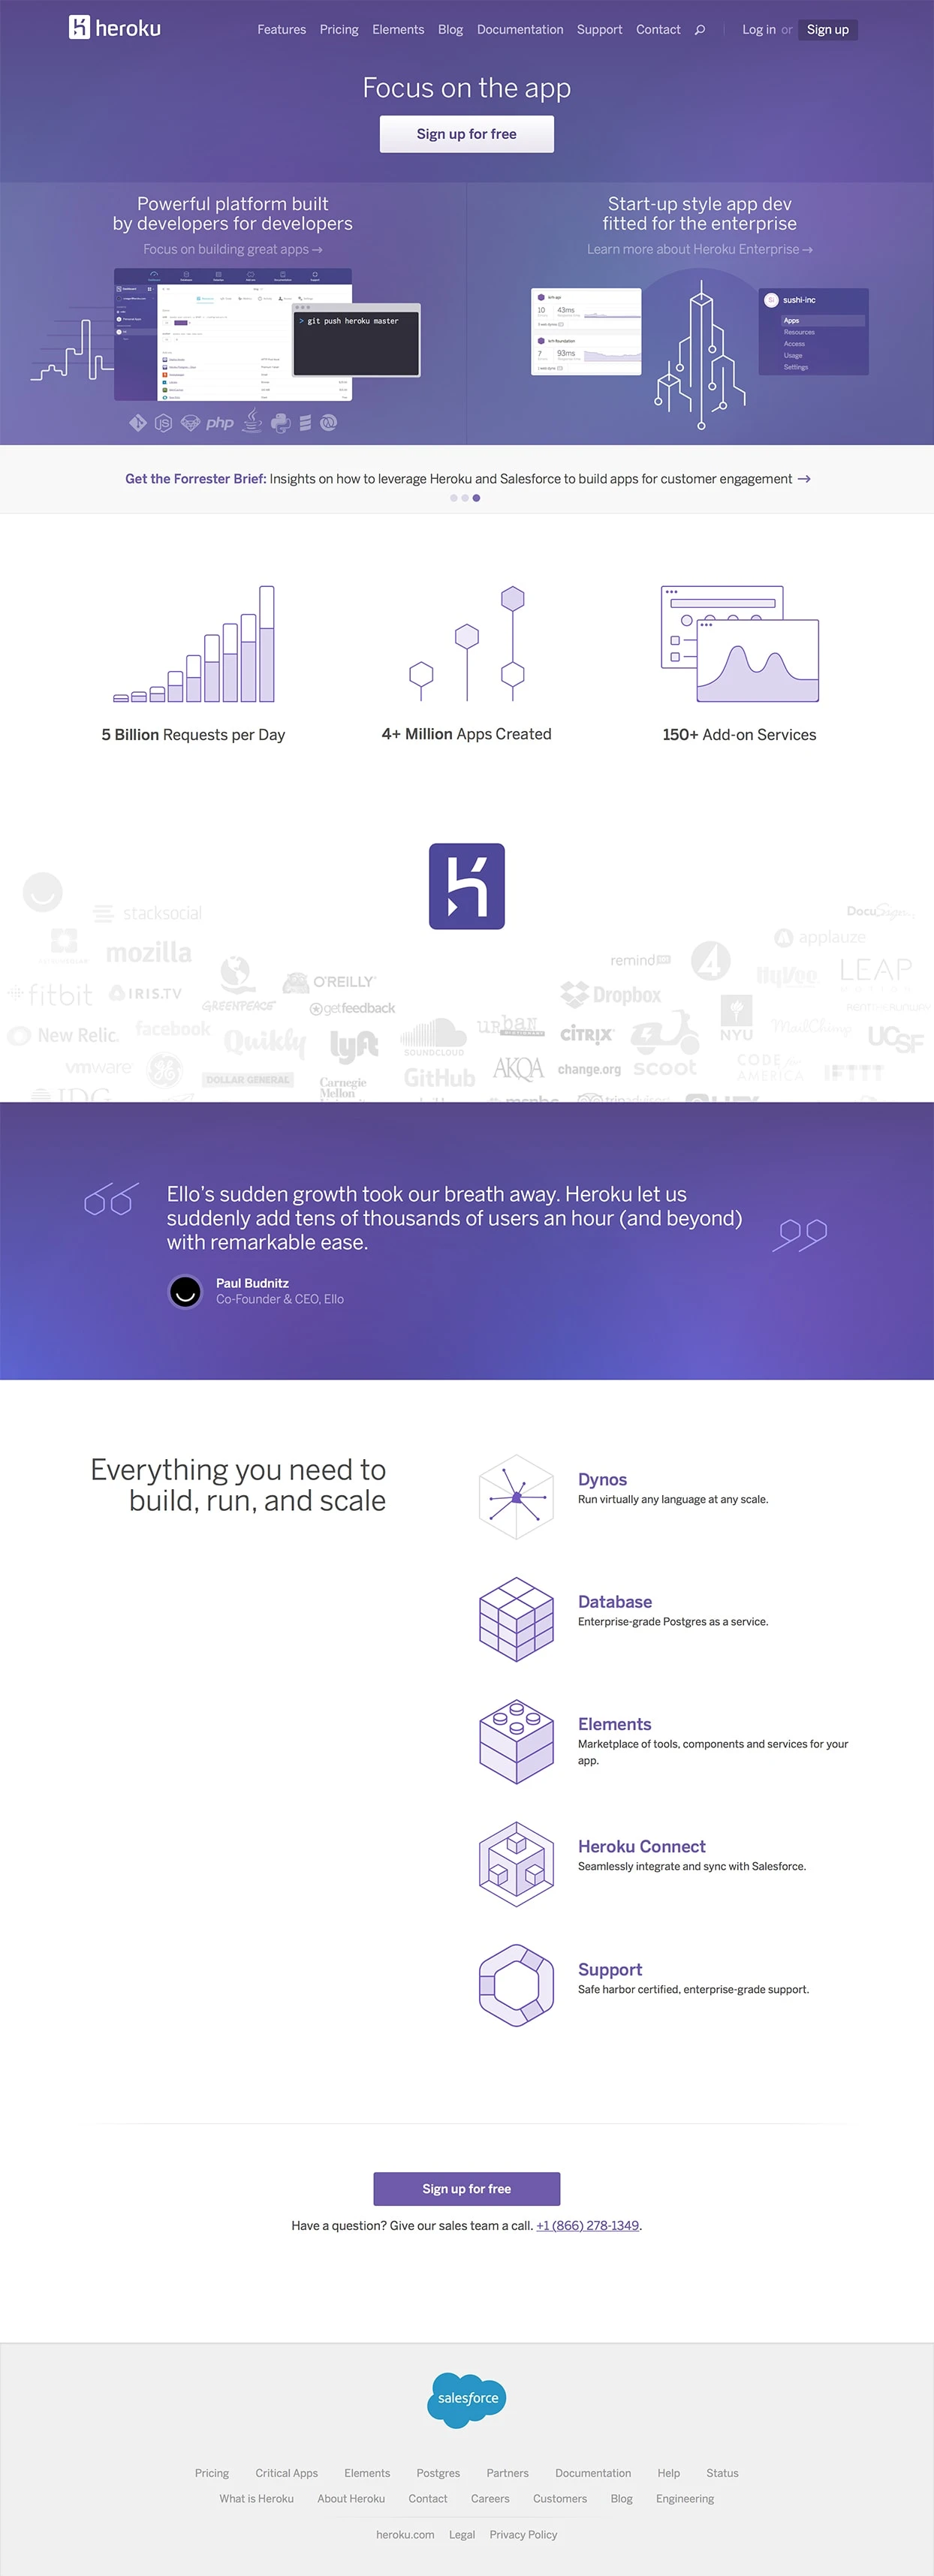 Heroku Landing Page Example: Heroku is a platform as a service (PaaS) that enables developers to build and run applications entirely in the cloud.